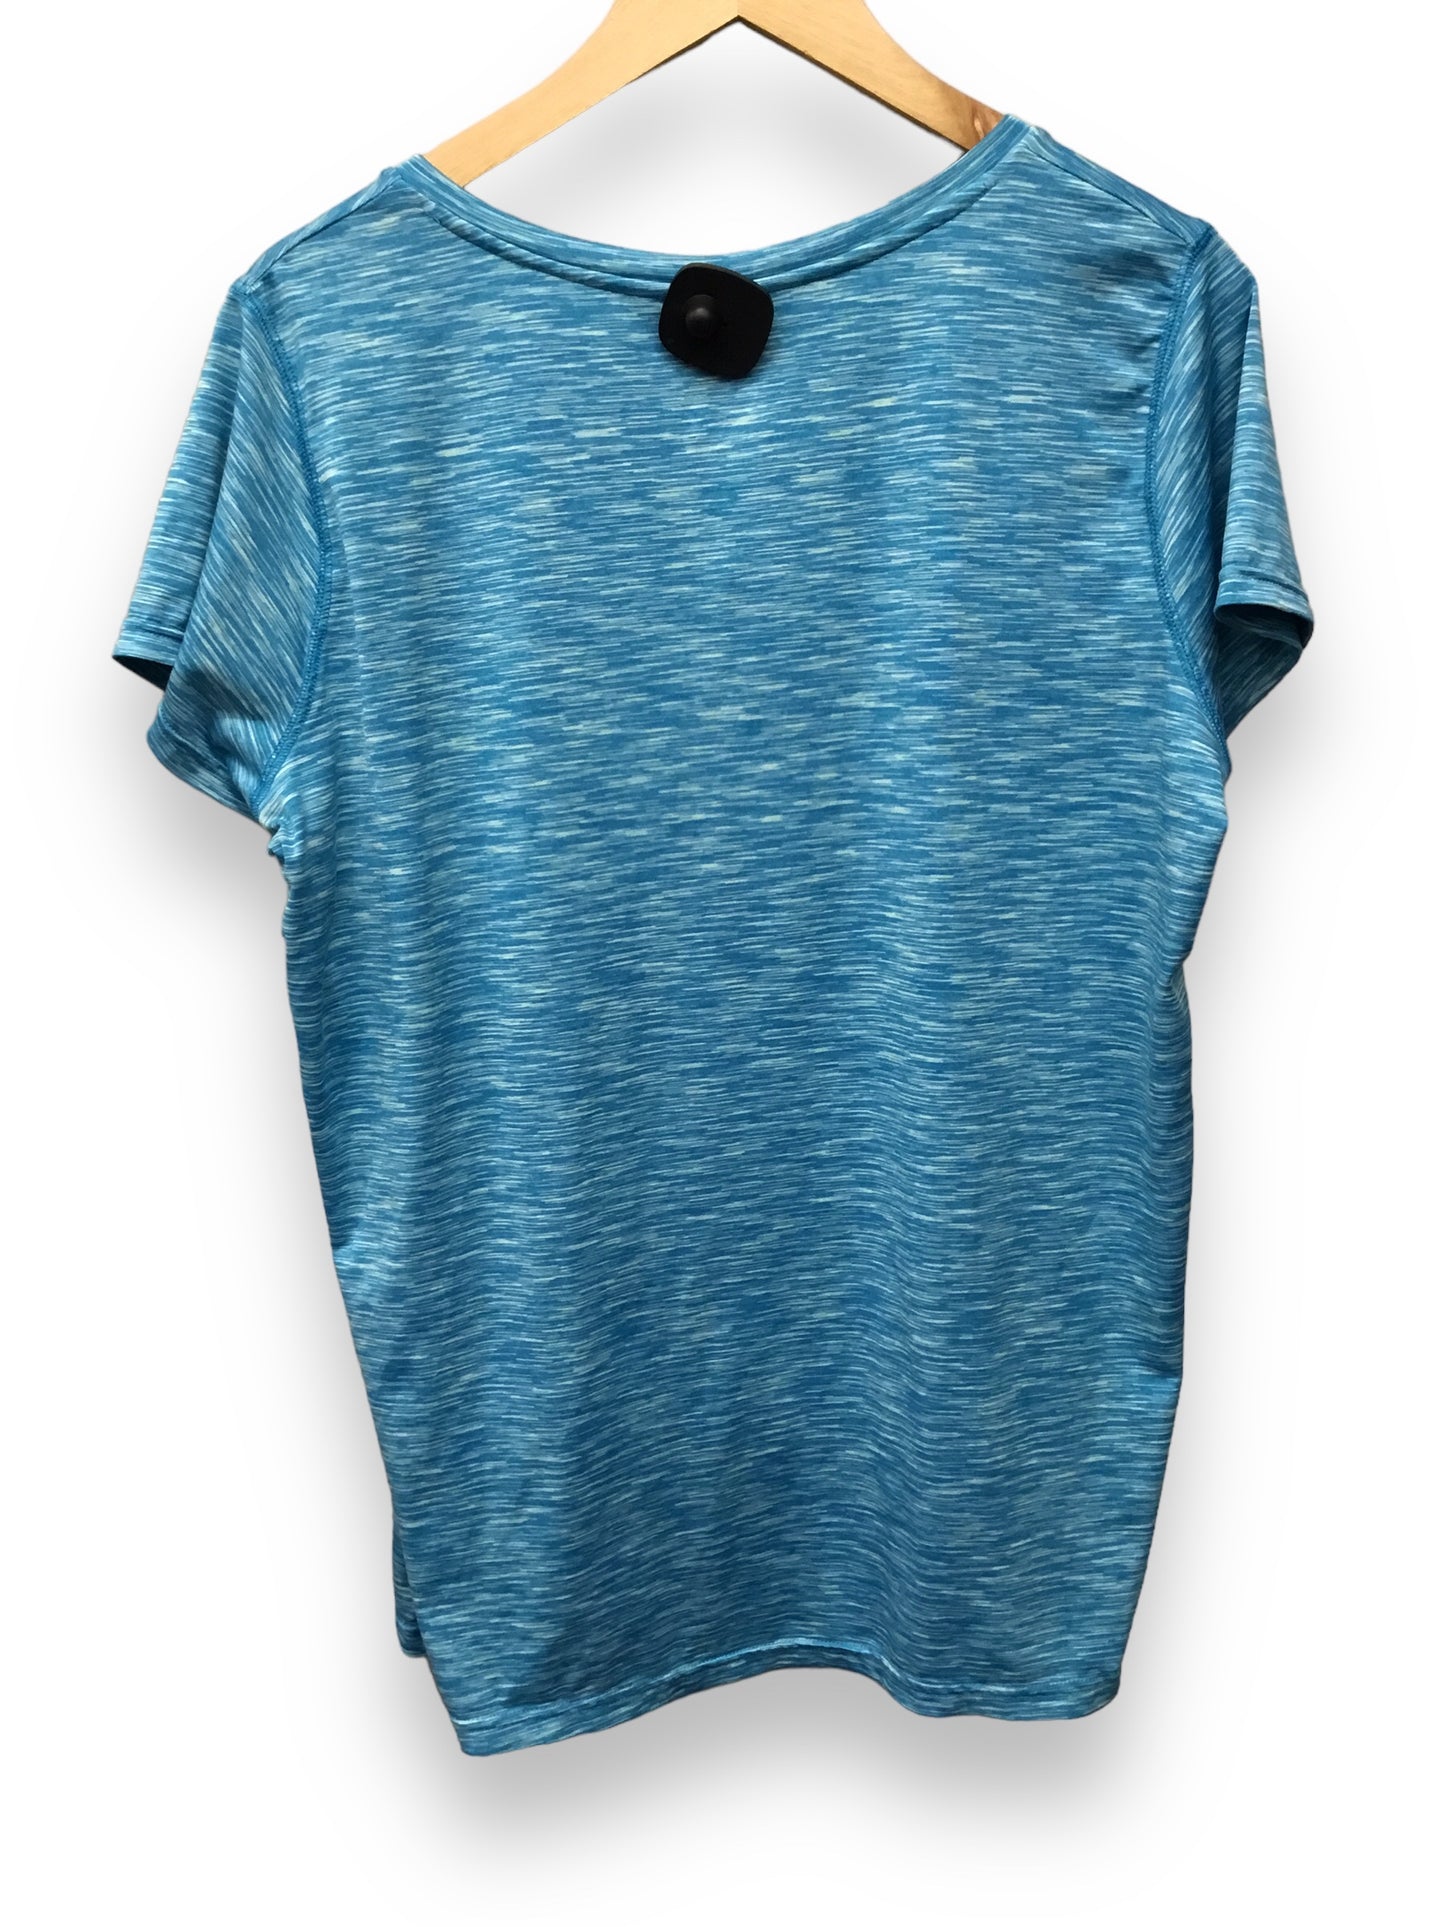 Athletic Top Short Sleeve By Nyl Wear  Size: 1x